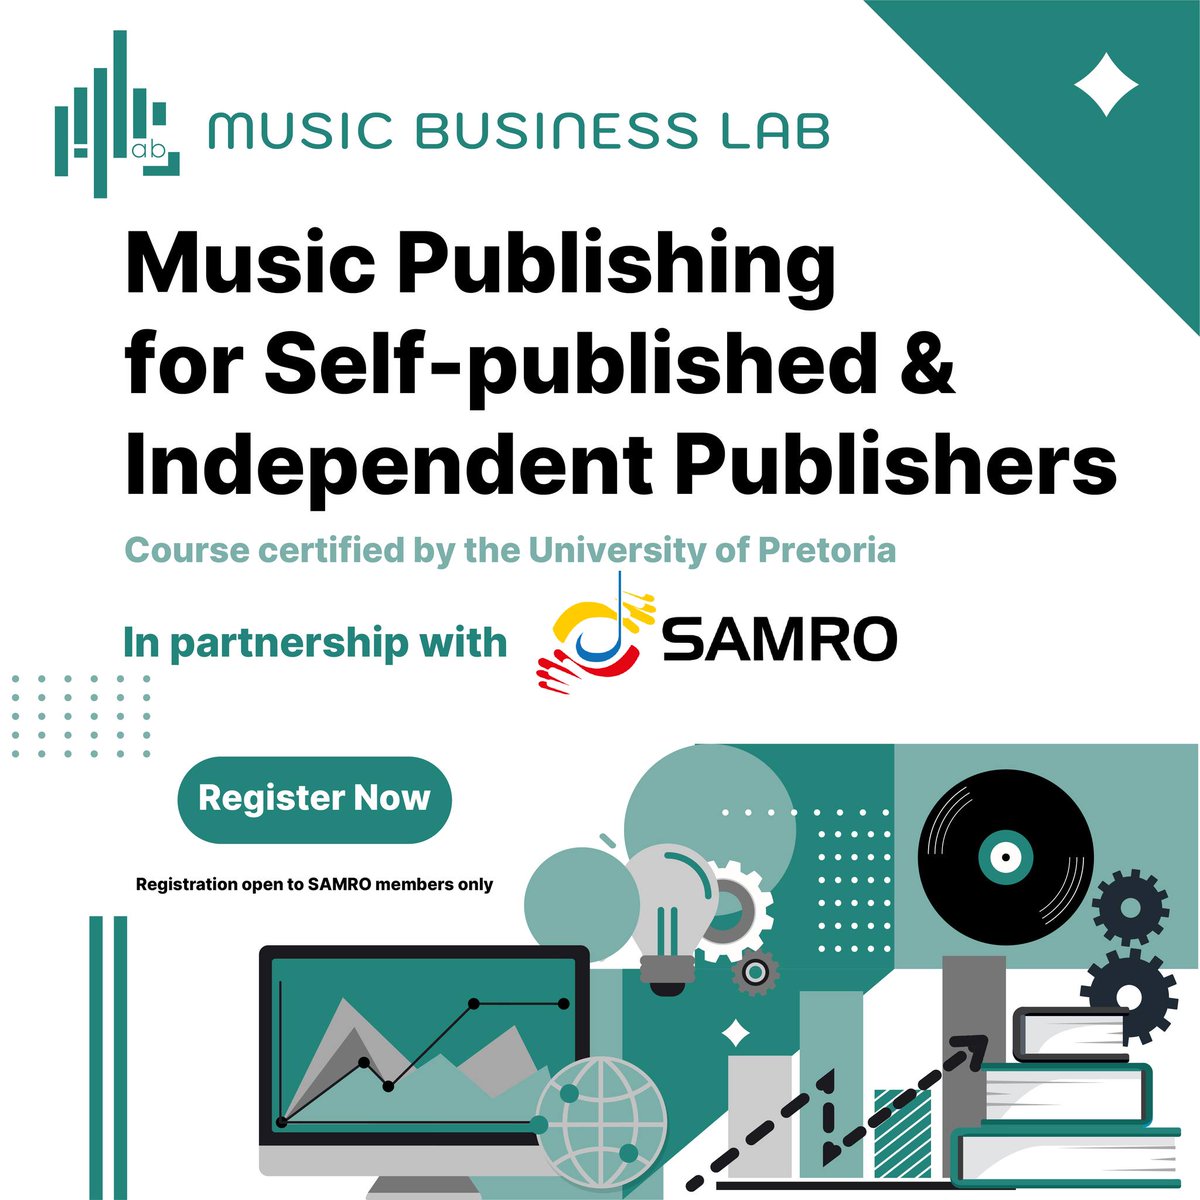 REMINDER: SAMRO is extending the acceptance of applications nationwide for the SAMRO Music Business Lab initiative, following widespread interest. Applicants must have a stable internet connection for the online classes. This collaboration with the Music Business Lab offers a…